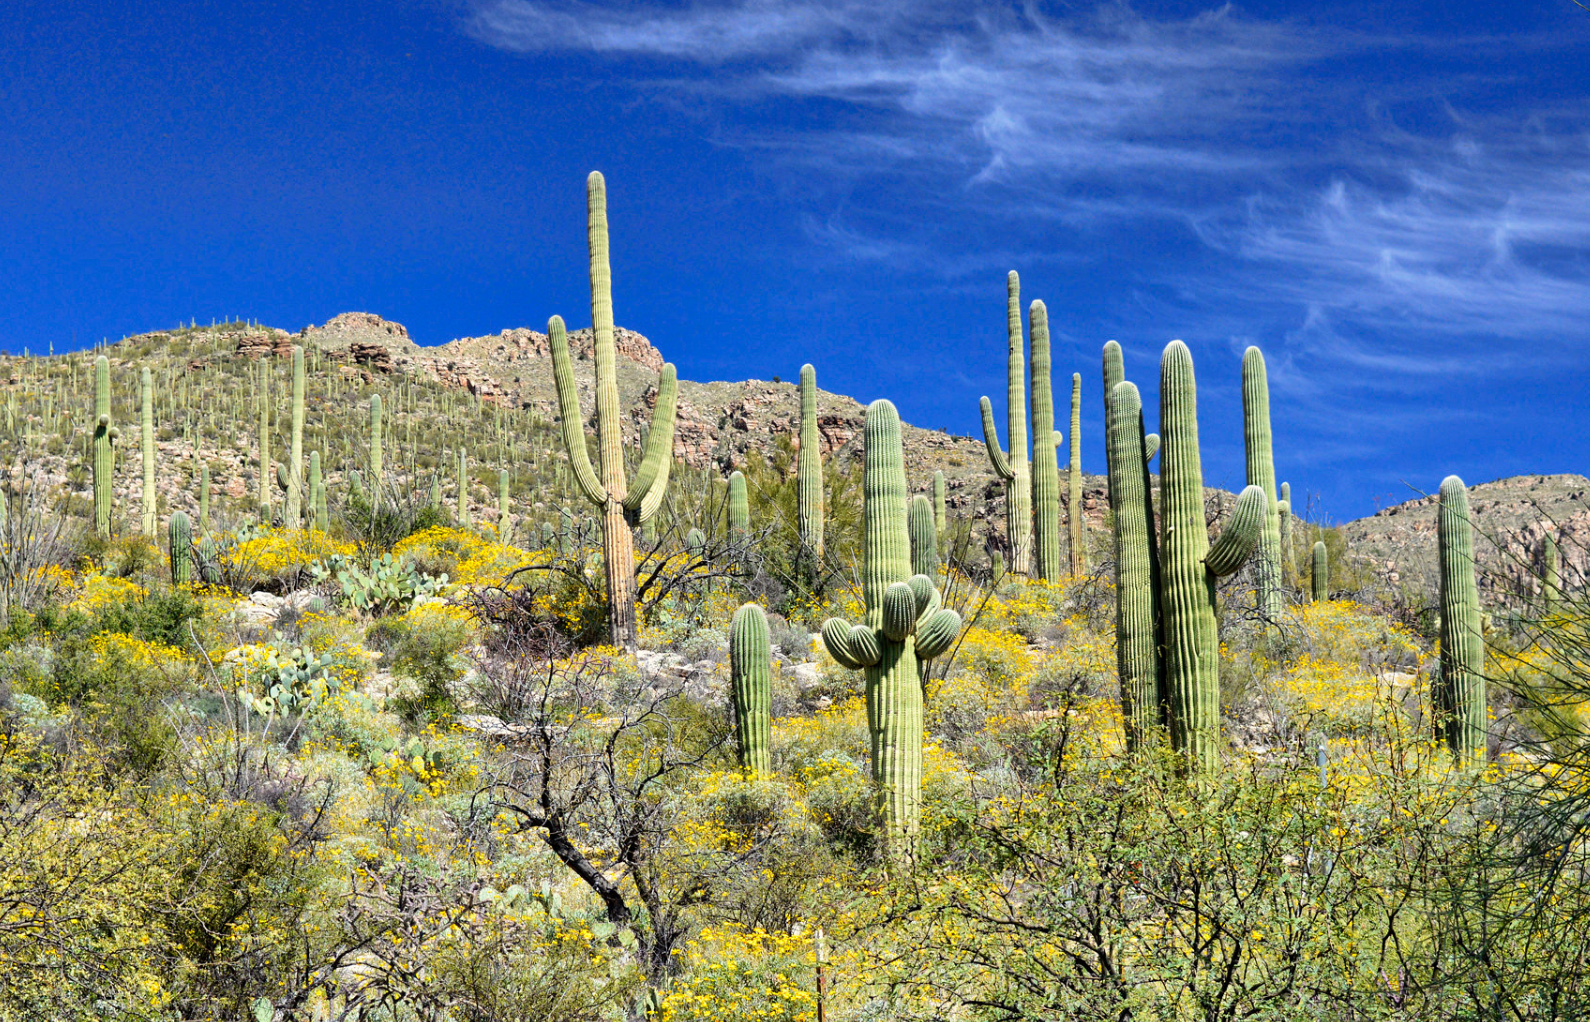 Mosaics In Science  Saguaros, Butterflies, and Days Out in The Sonoran  Desert